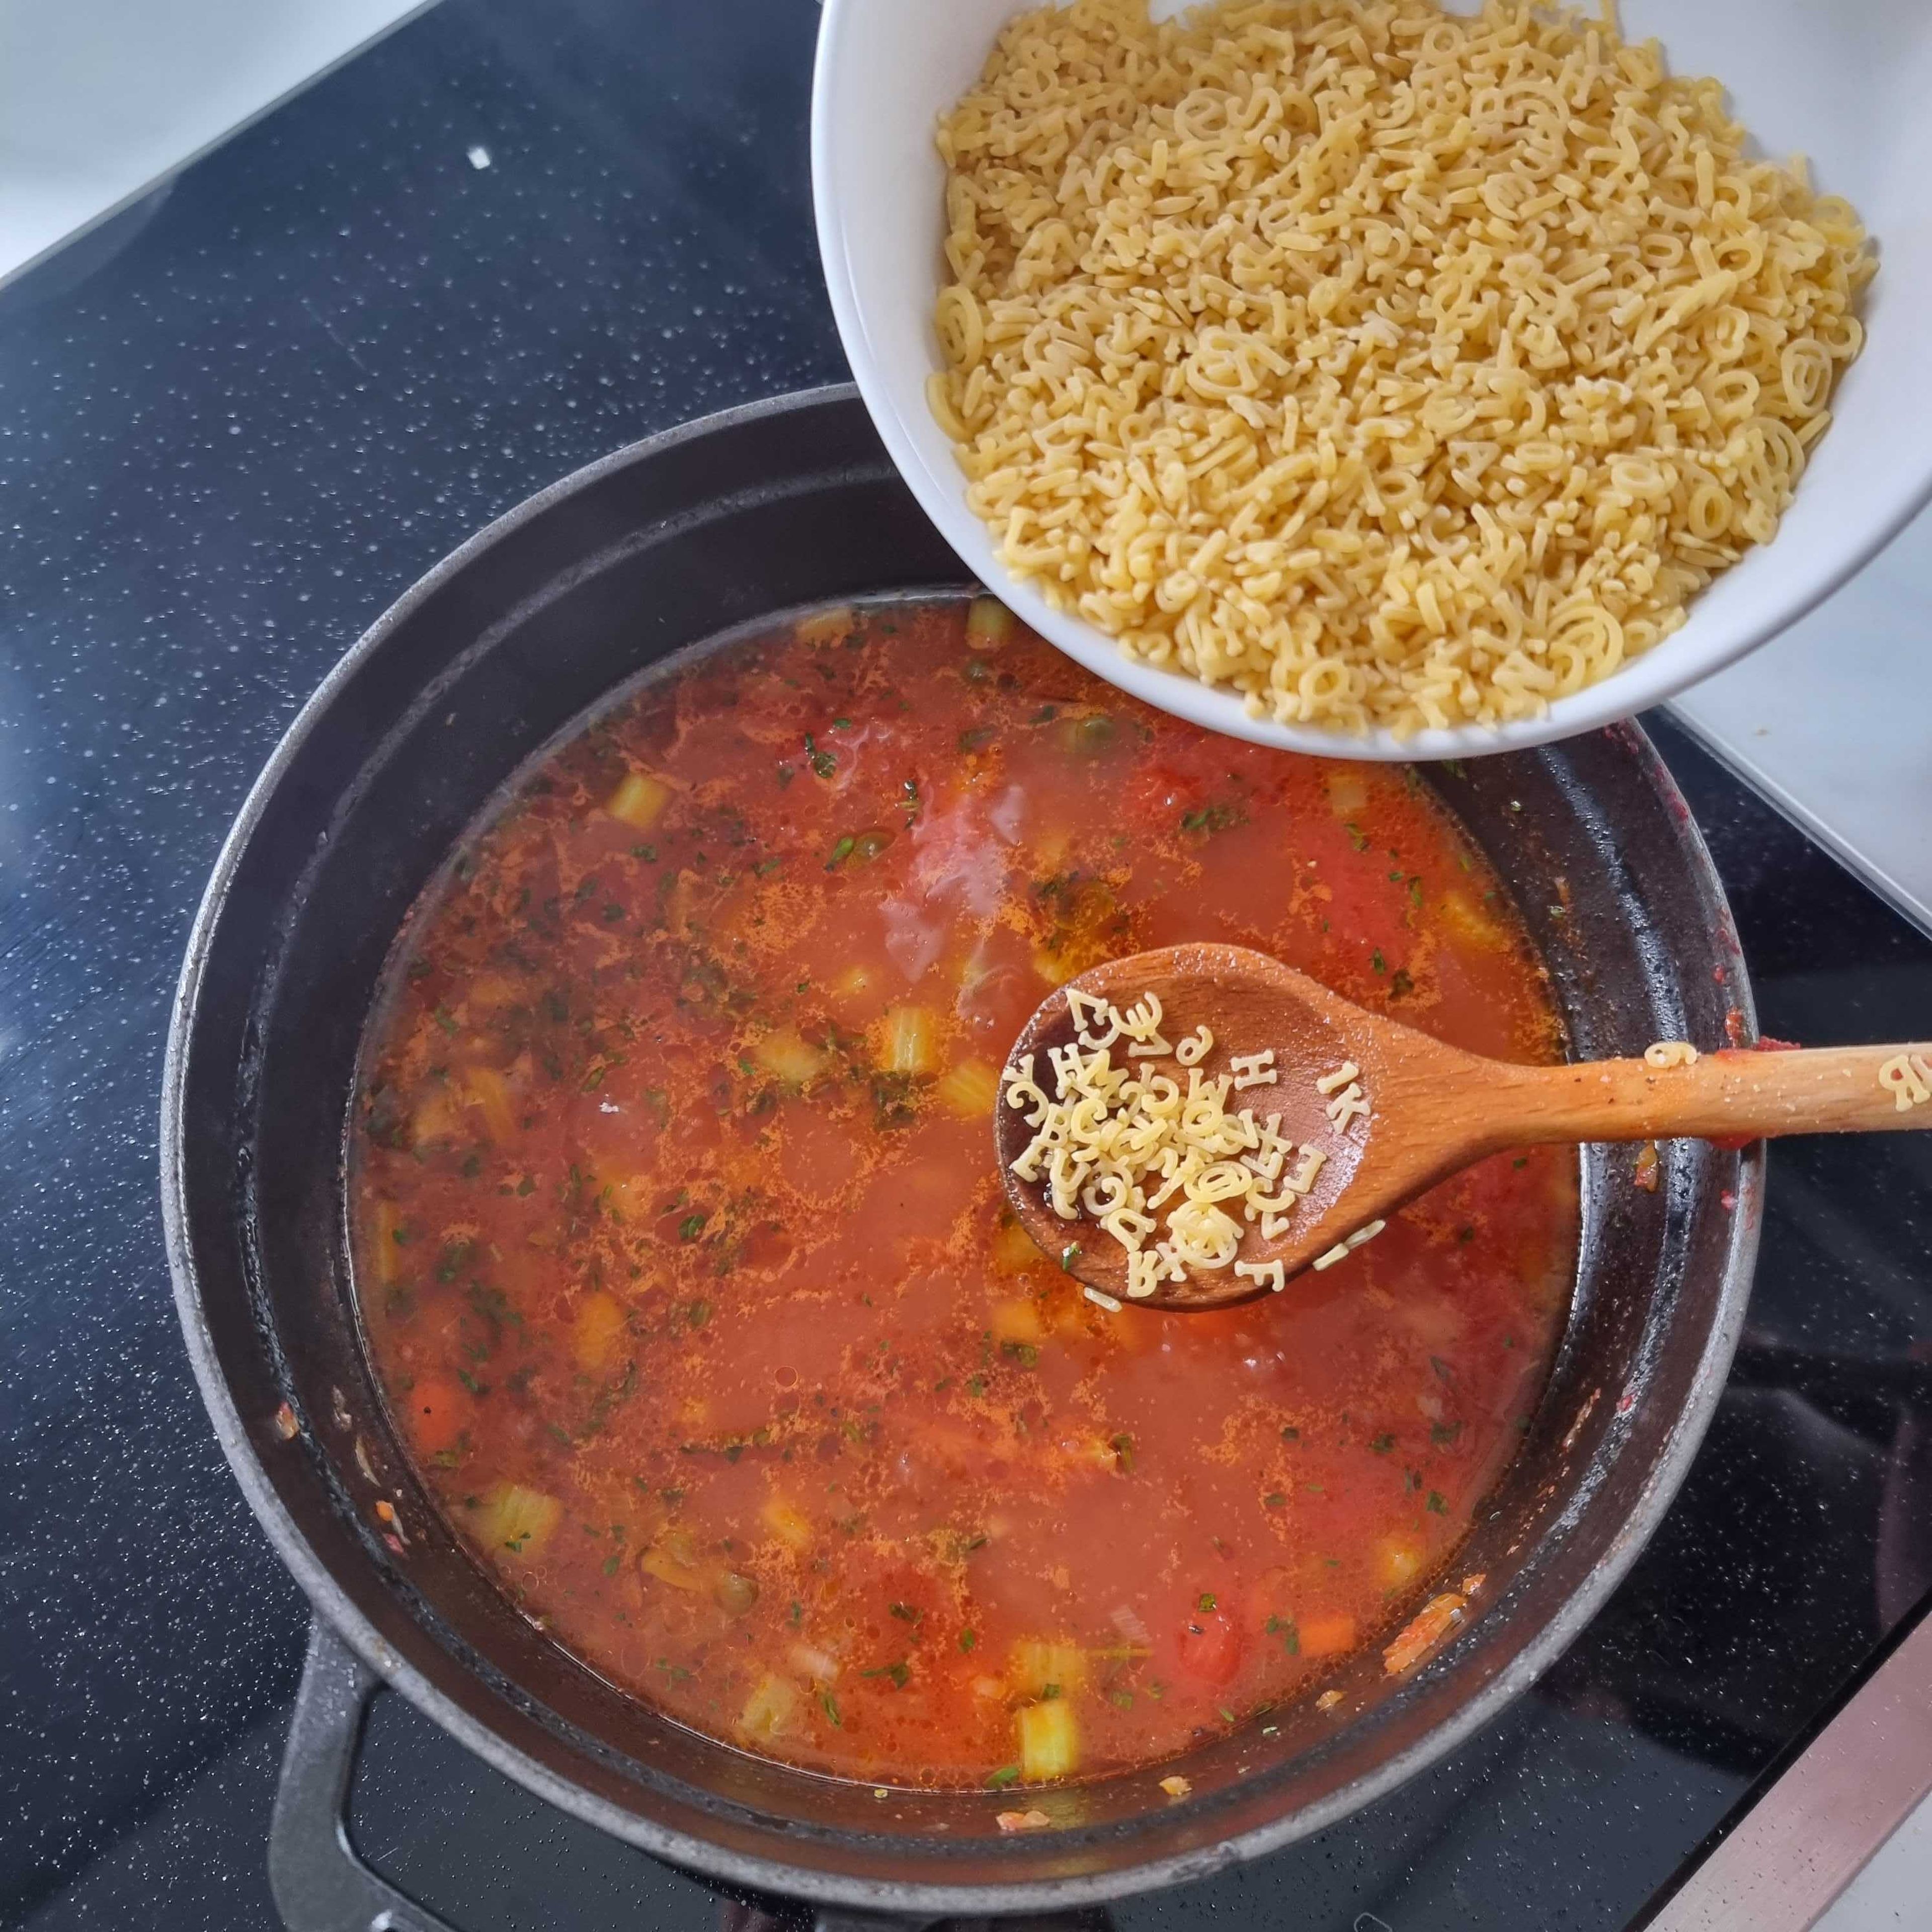 Next, add the alphabet noodles and cook for approx. 7-8 min. or until cooked "al dente". Lastly, stir the herbs into the soup. Serve the soup with shaved parmesan cheese. Enjoy your meal!